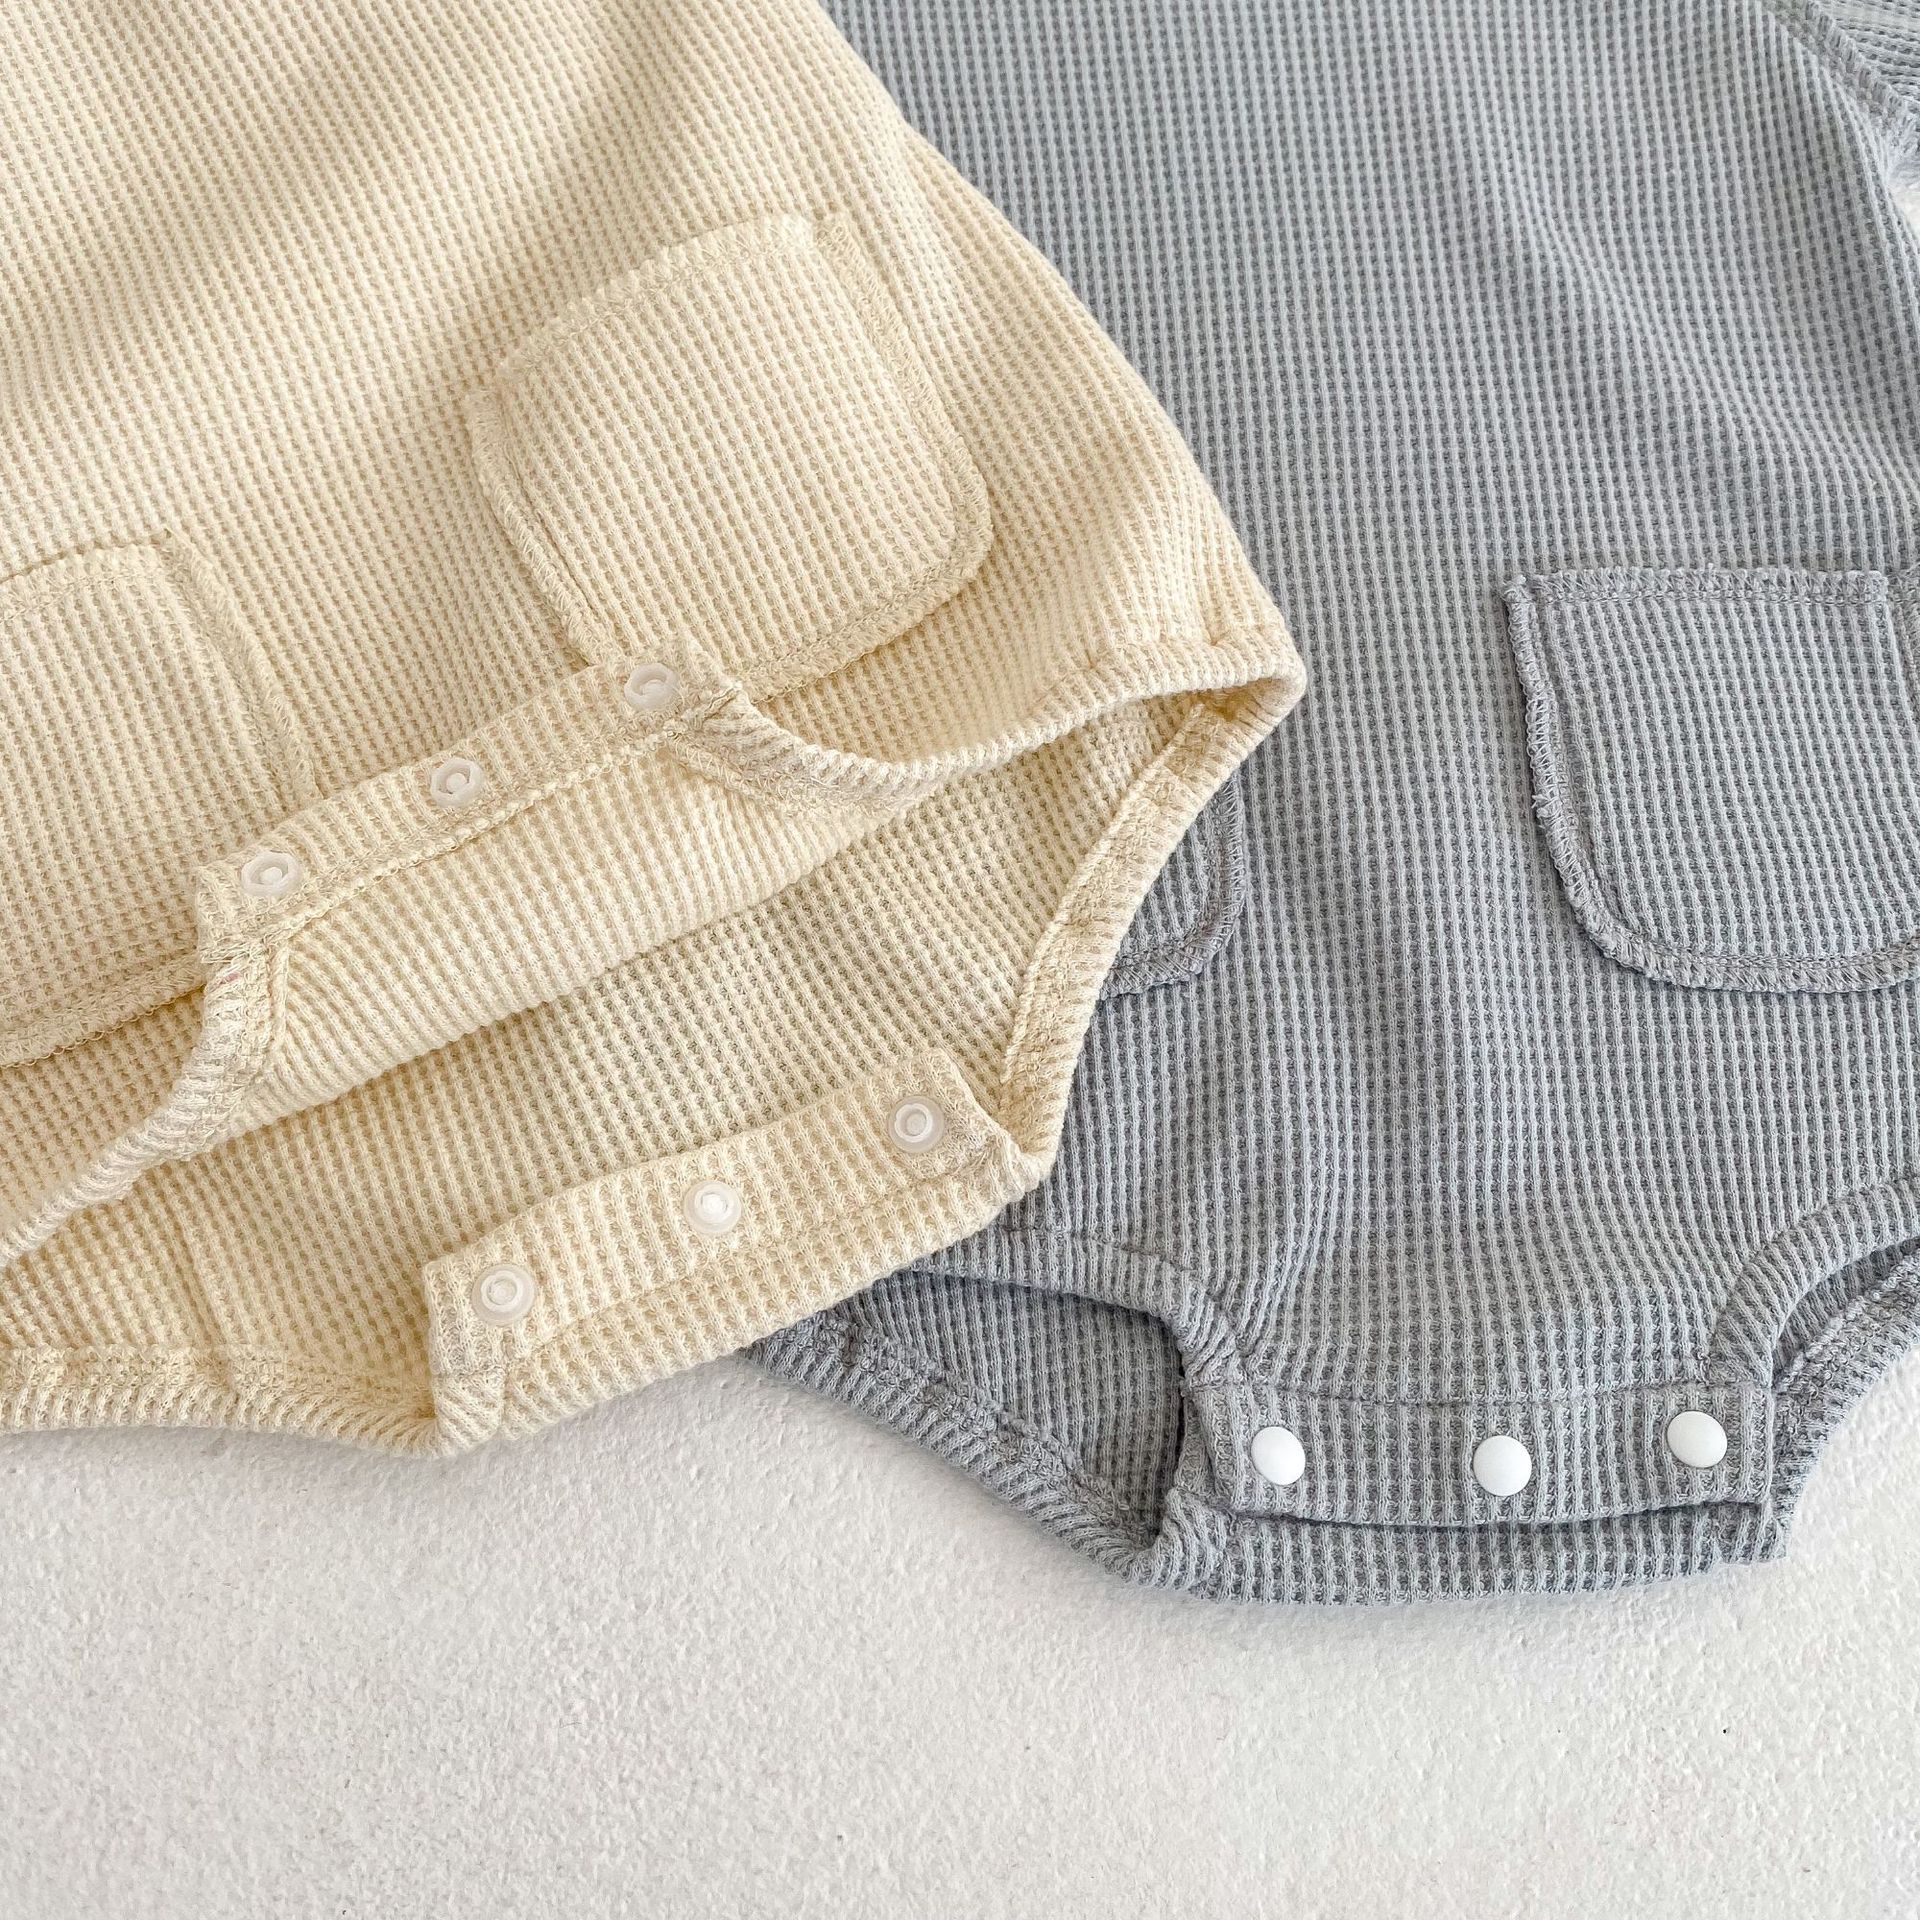 Custom High Quality Short Sleeve Baby Rompers Cotton Plain Pocket Striped Organic Cotton Baby Rompers